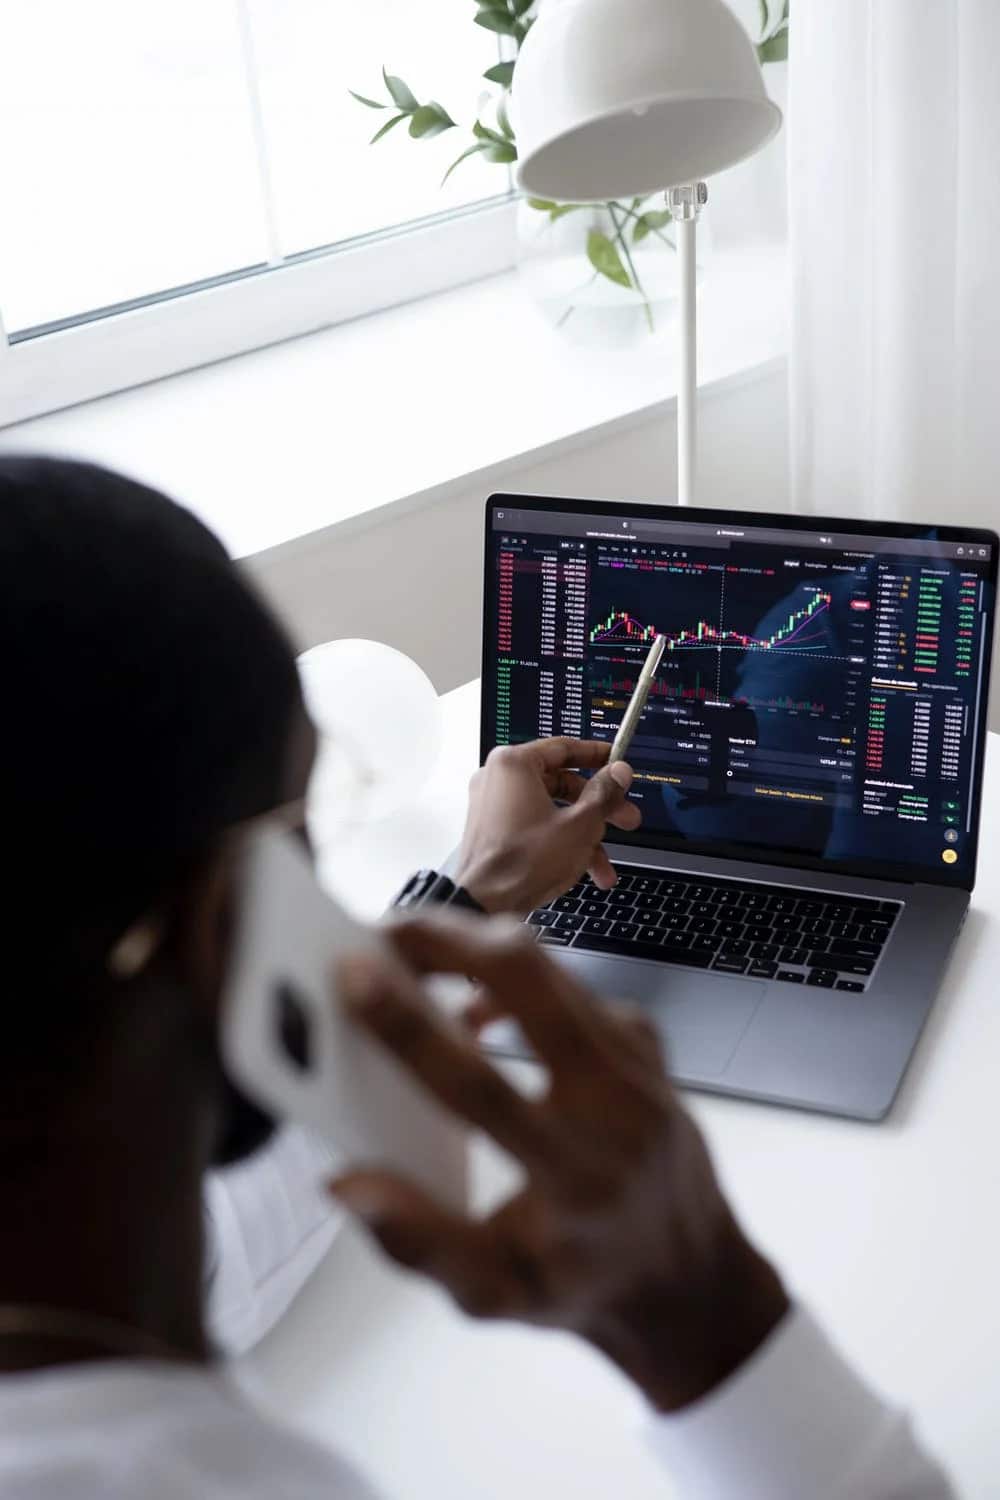 Which trading platform is the best for beginners in South Africa?